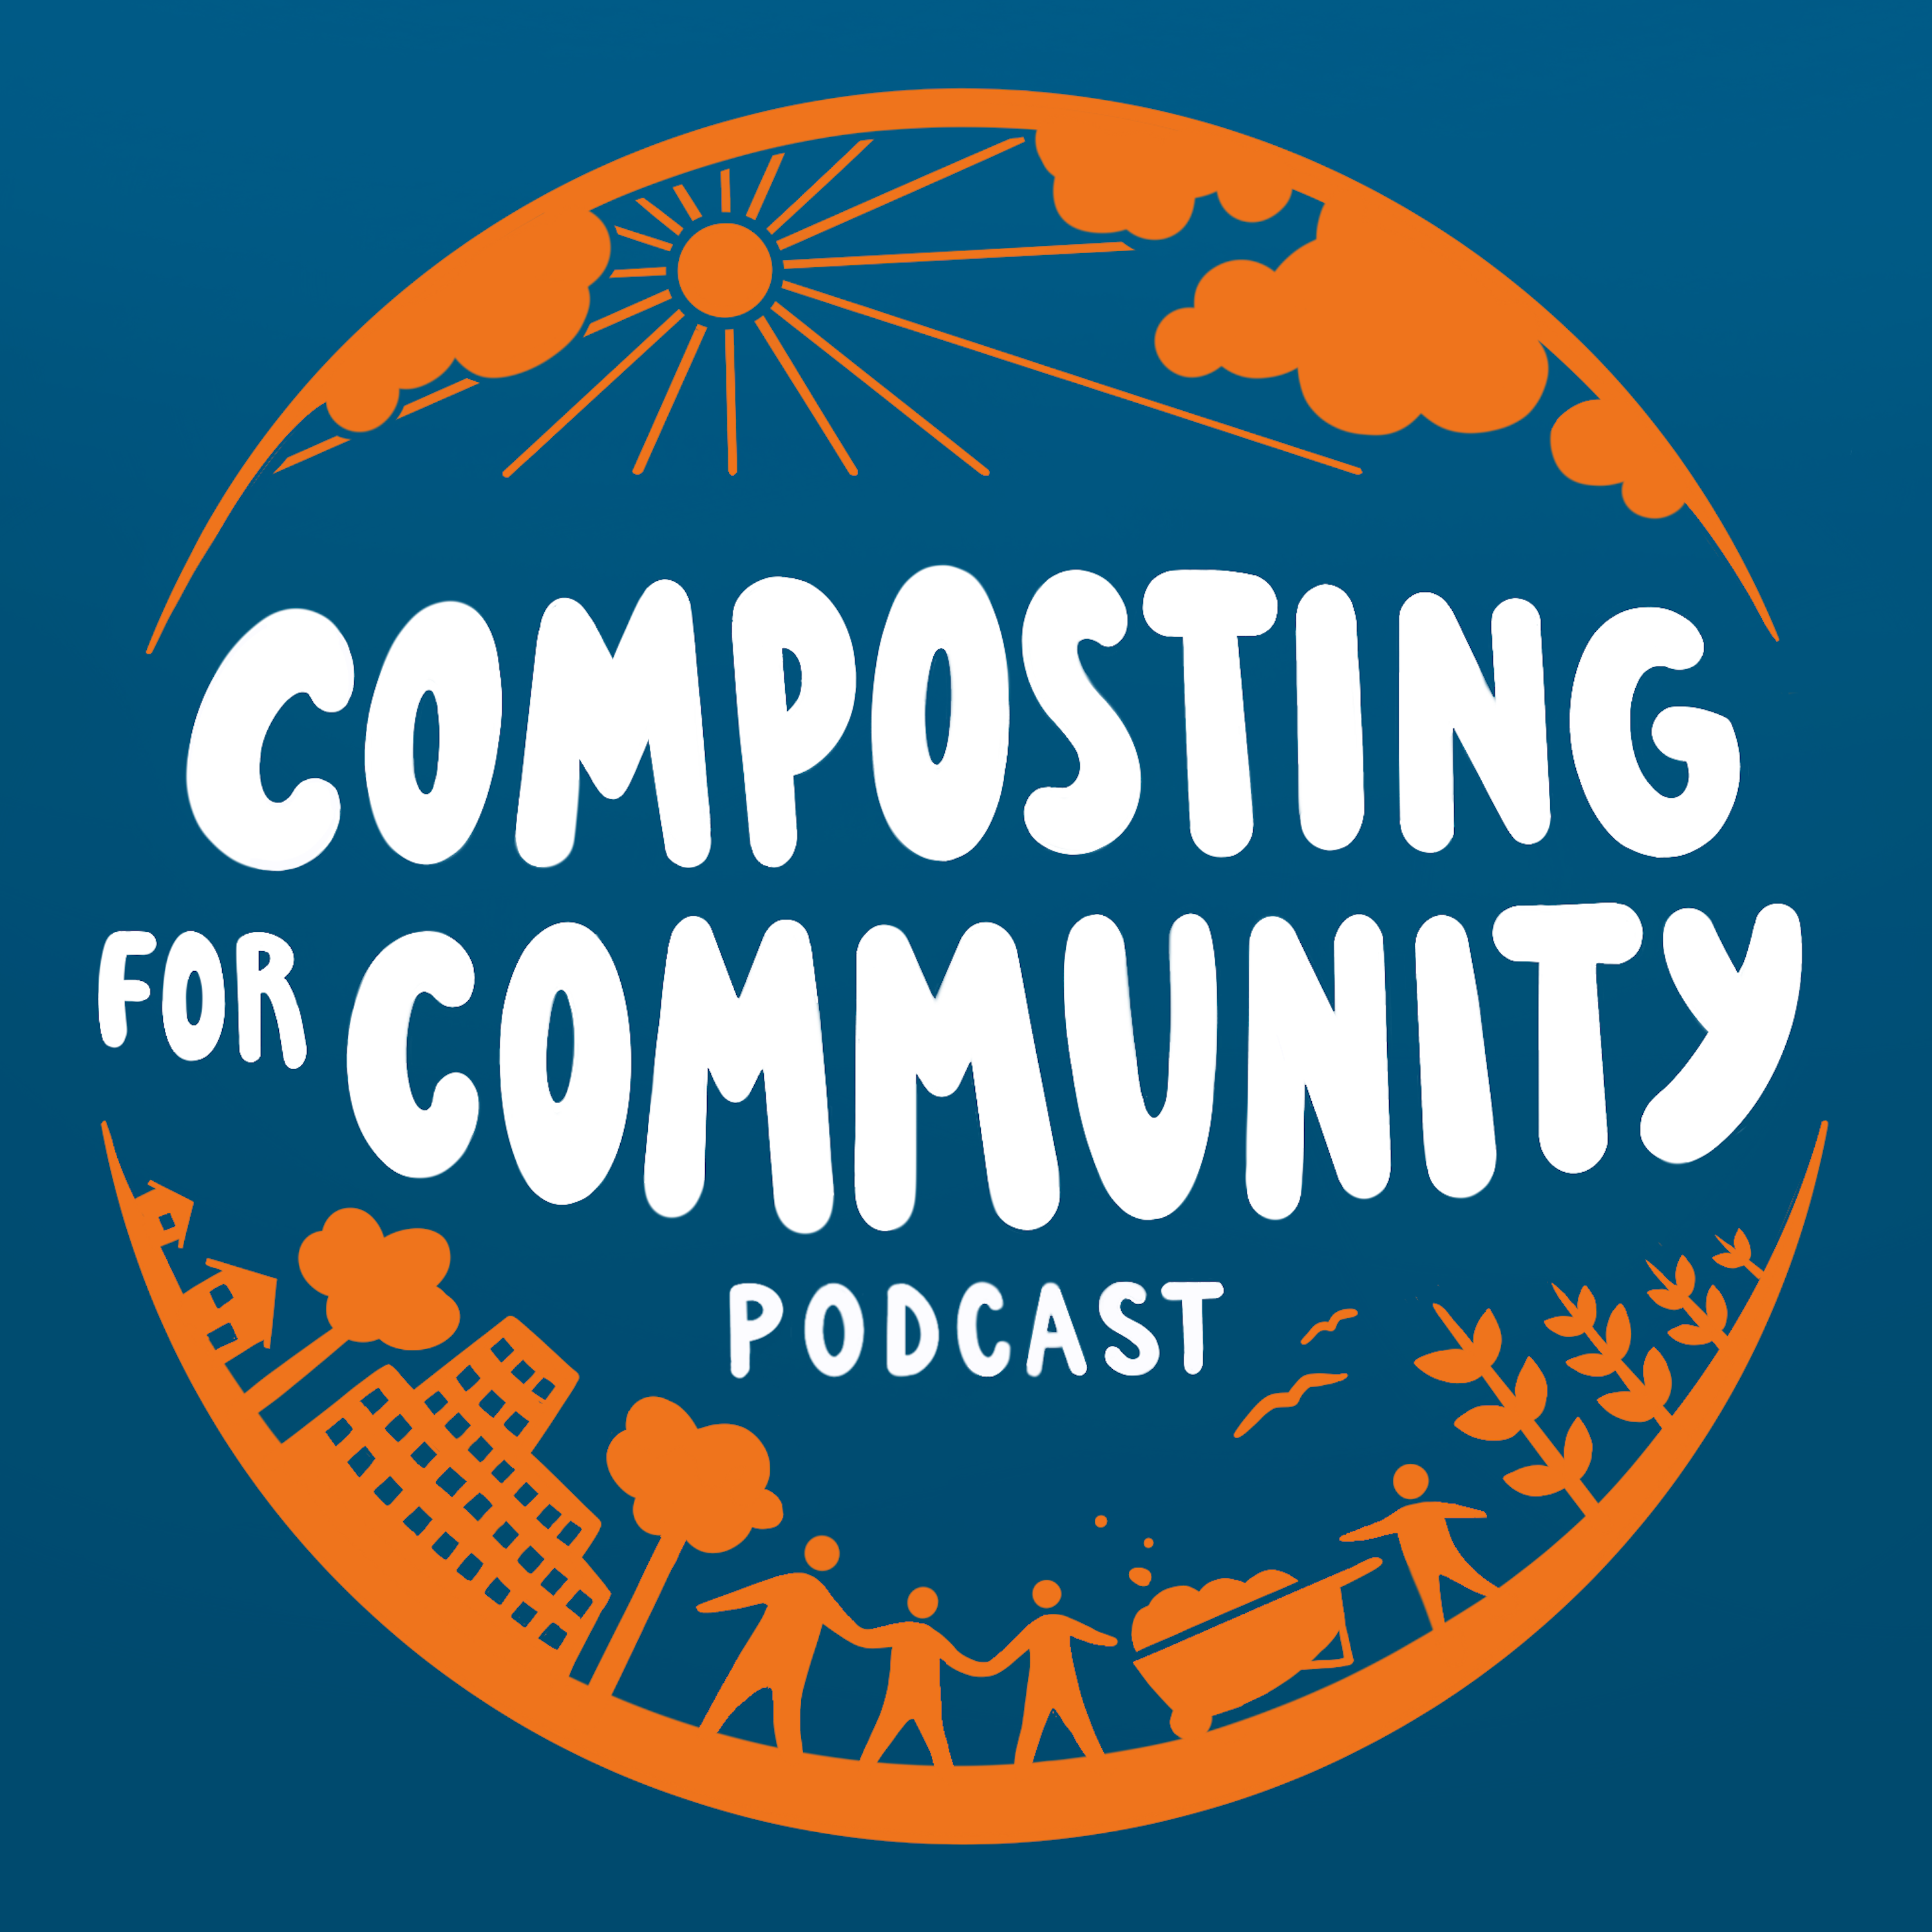 Composting for Community